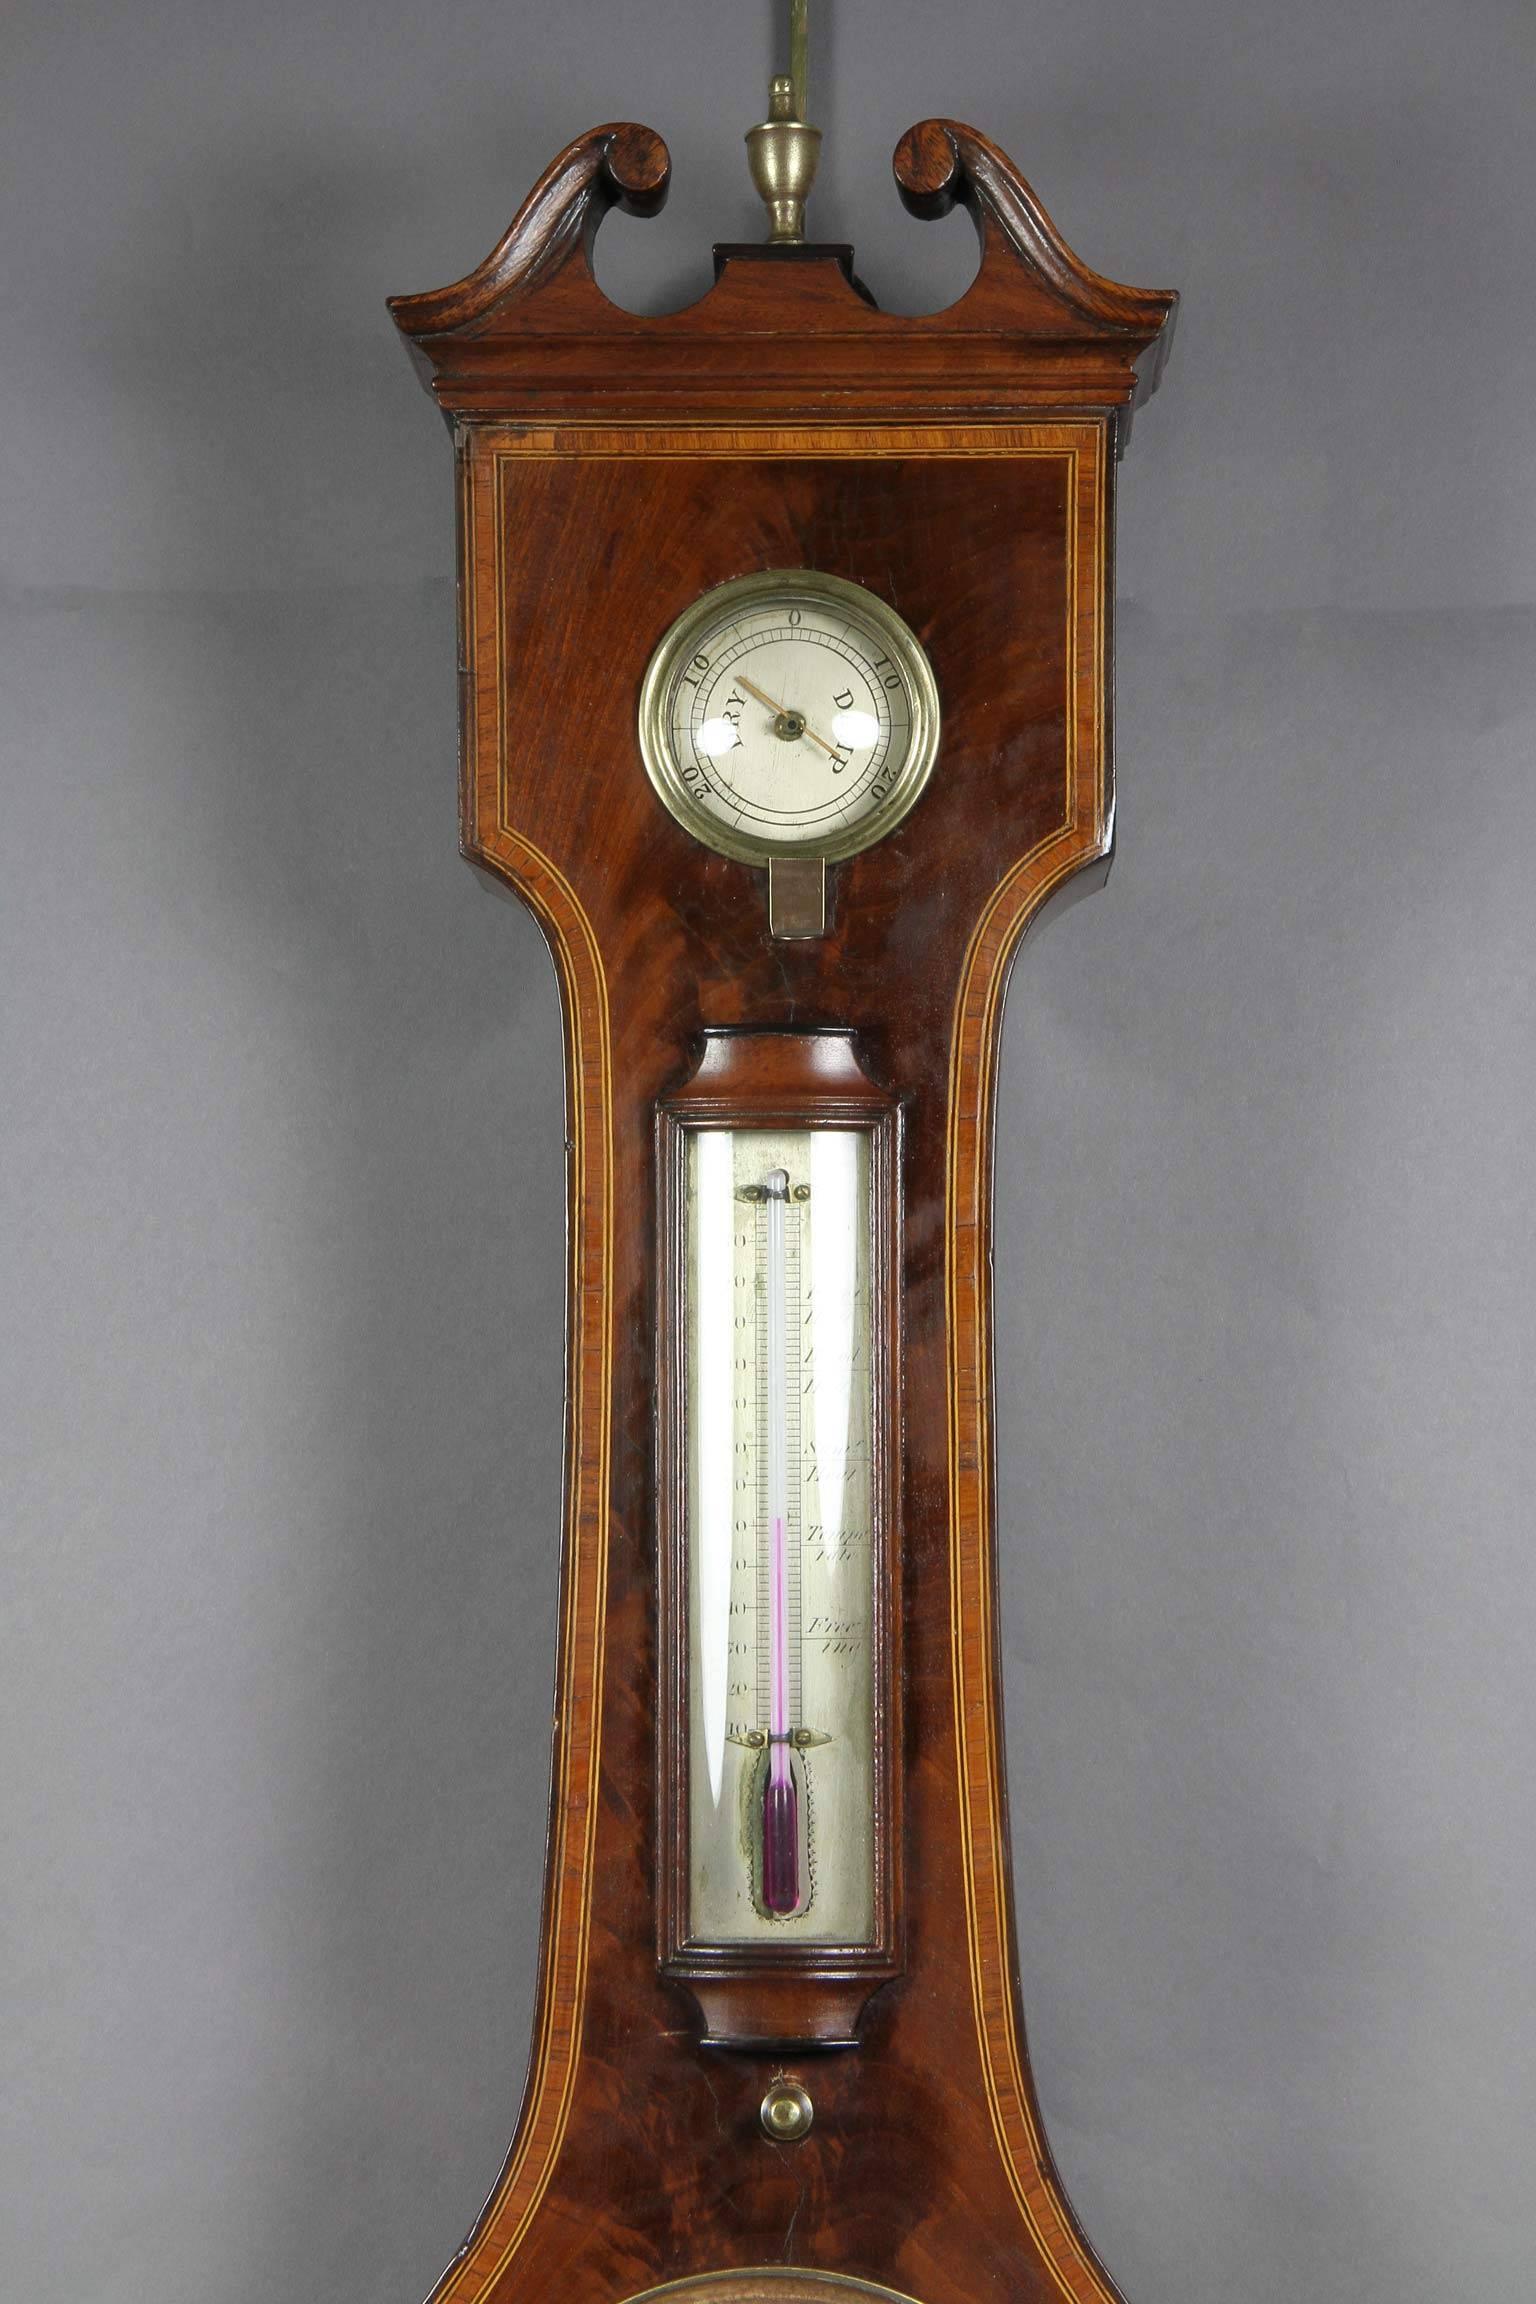 Broken arch top over a hydrometer dial and thermometer, clock, barometer dial and level.